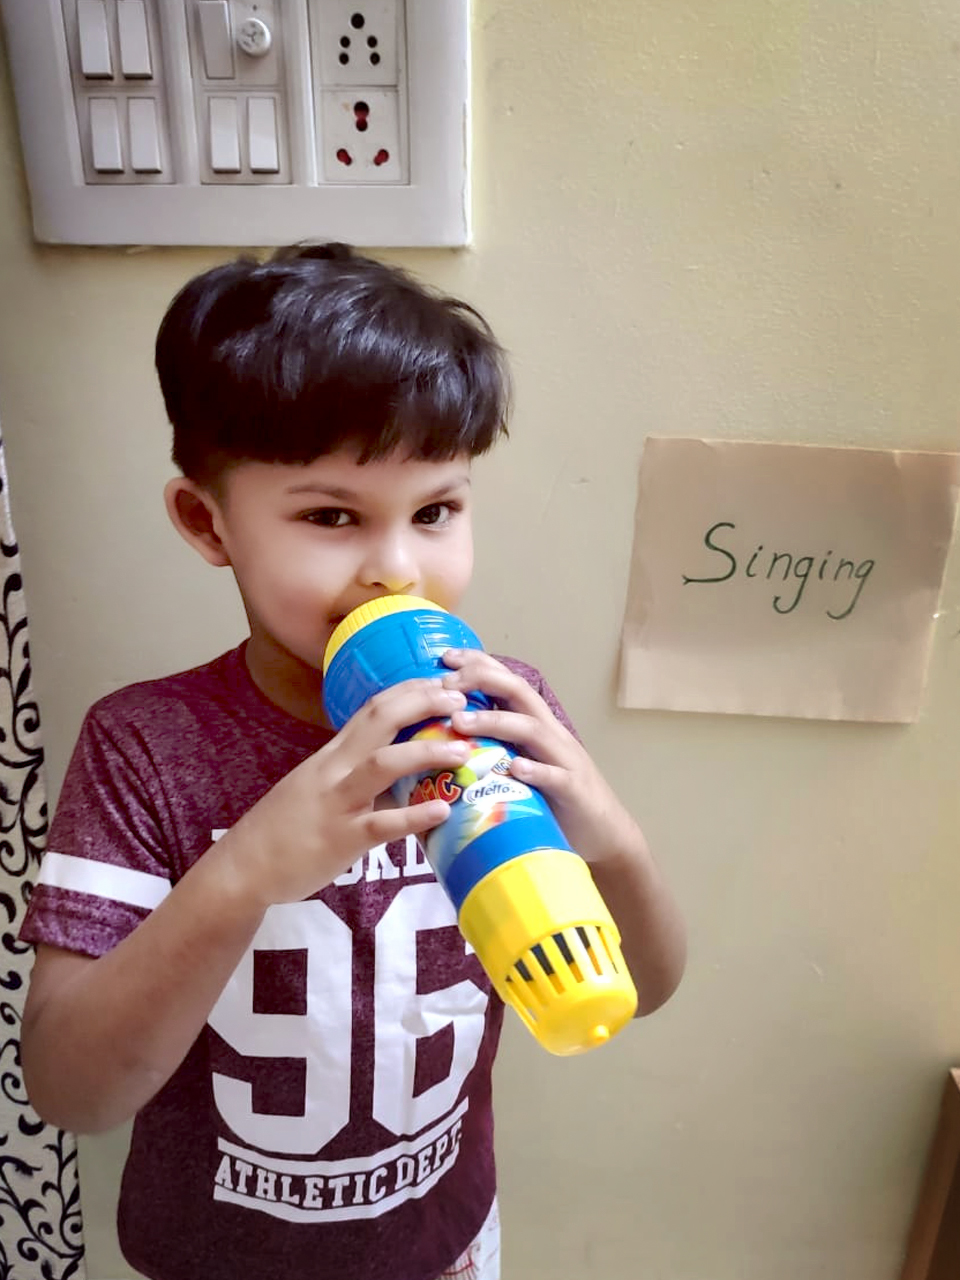 ACTION WORDS WITH FUN ACTIVITY